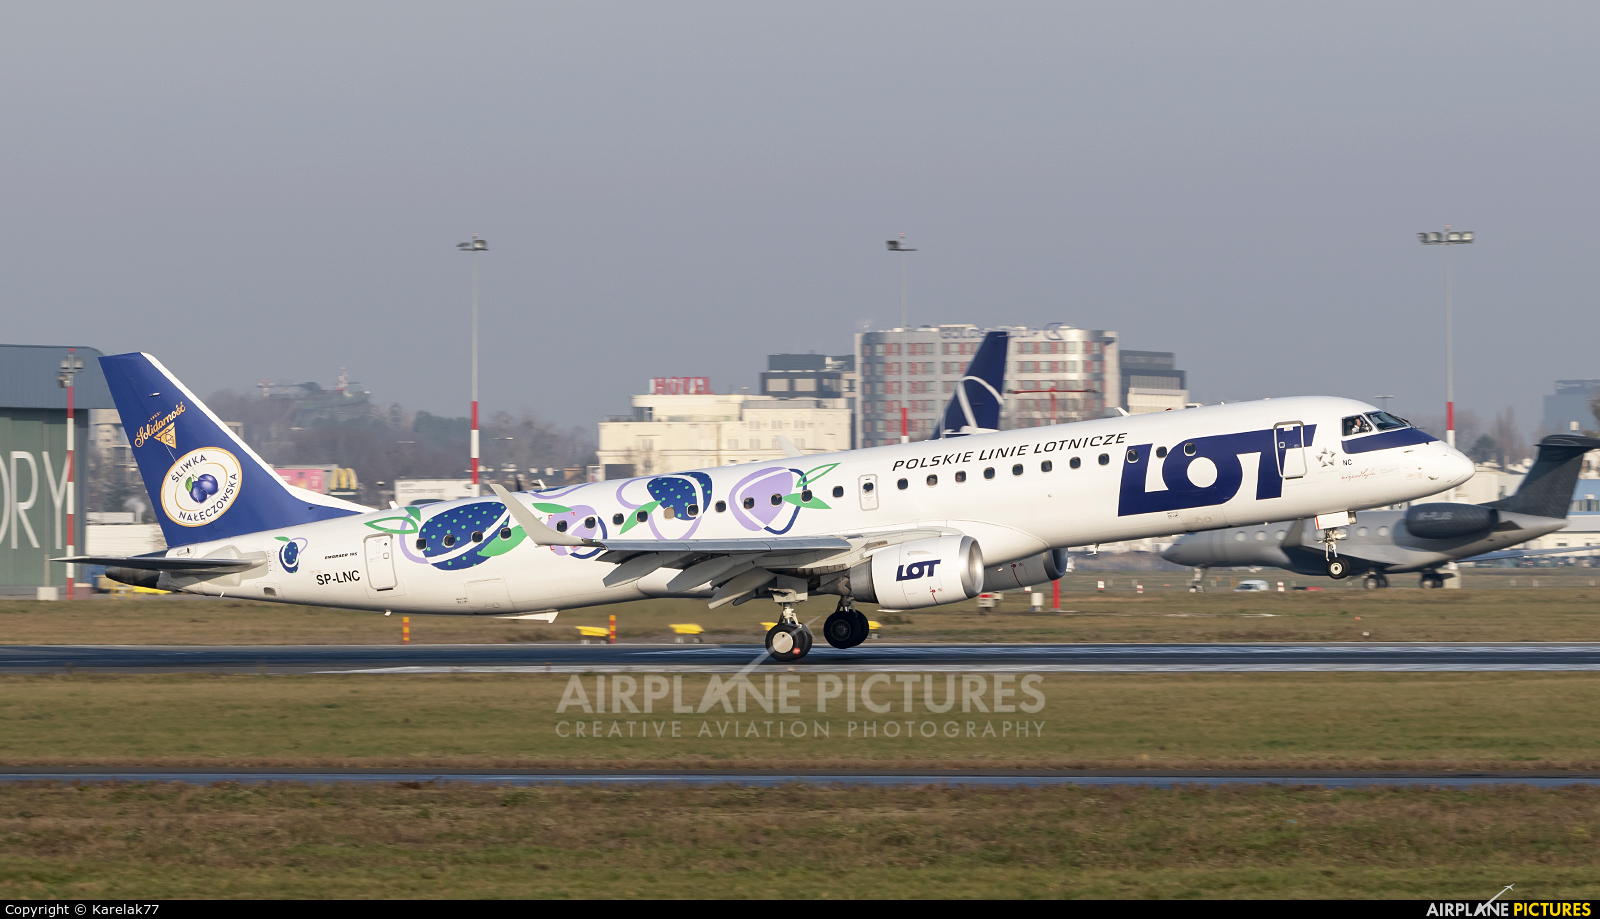 LOT - Polish Airlines SP-LNC aircraft at Warsaw - Frederic Chopin